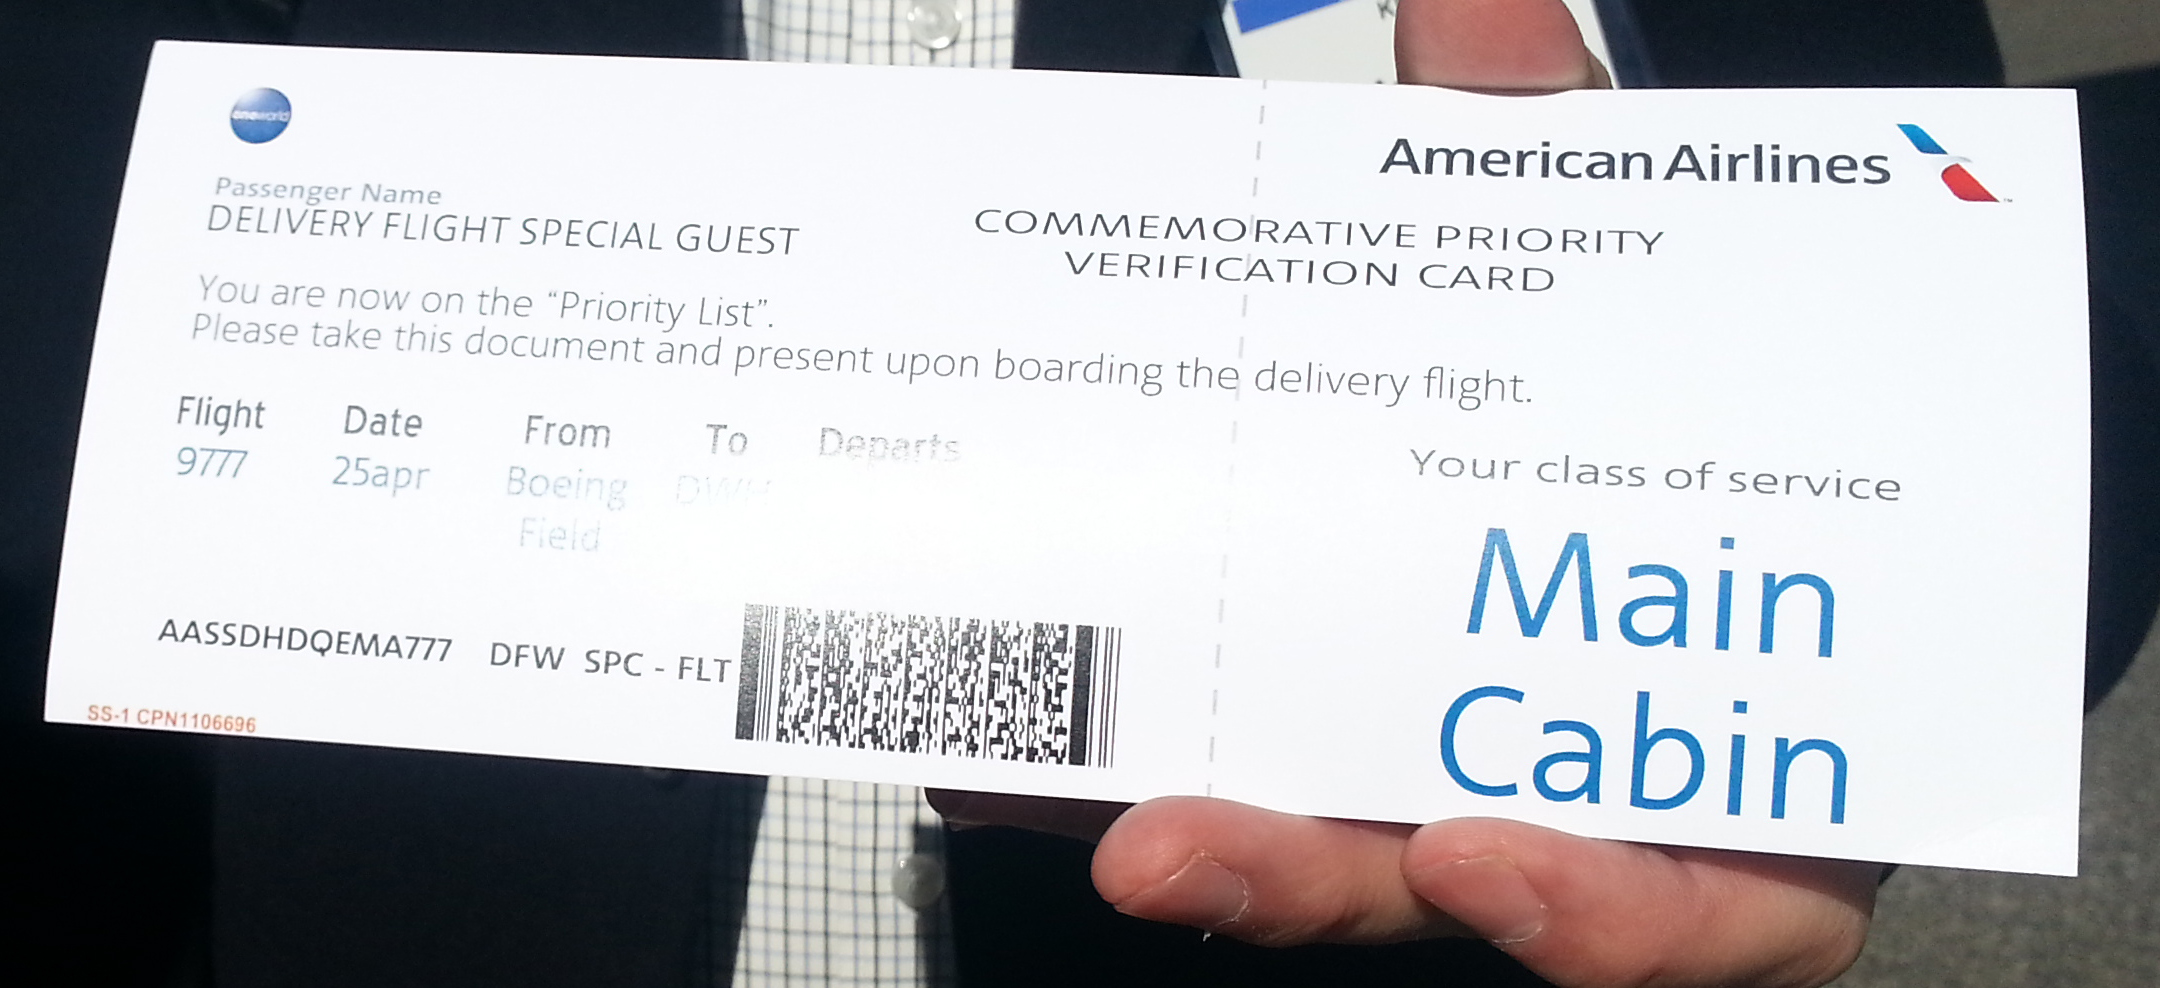 american airline ticket